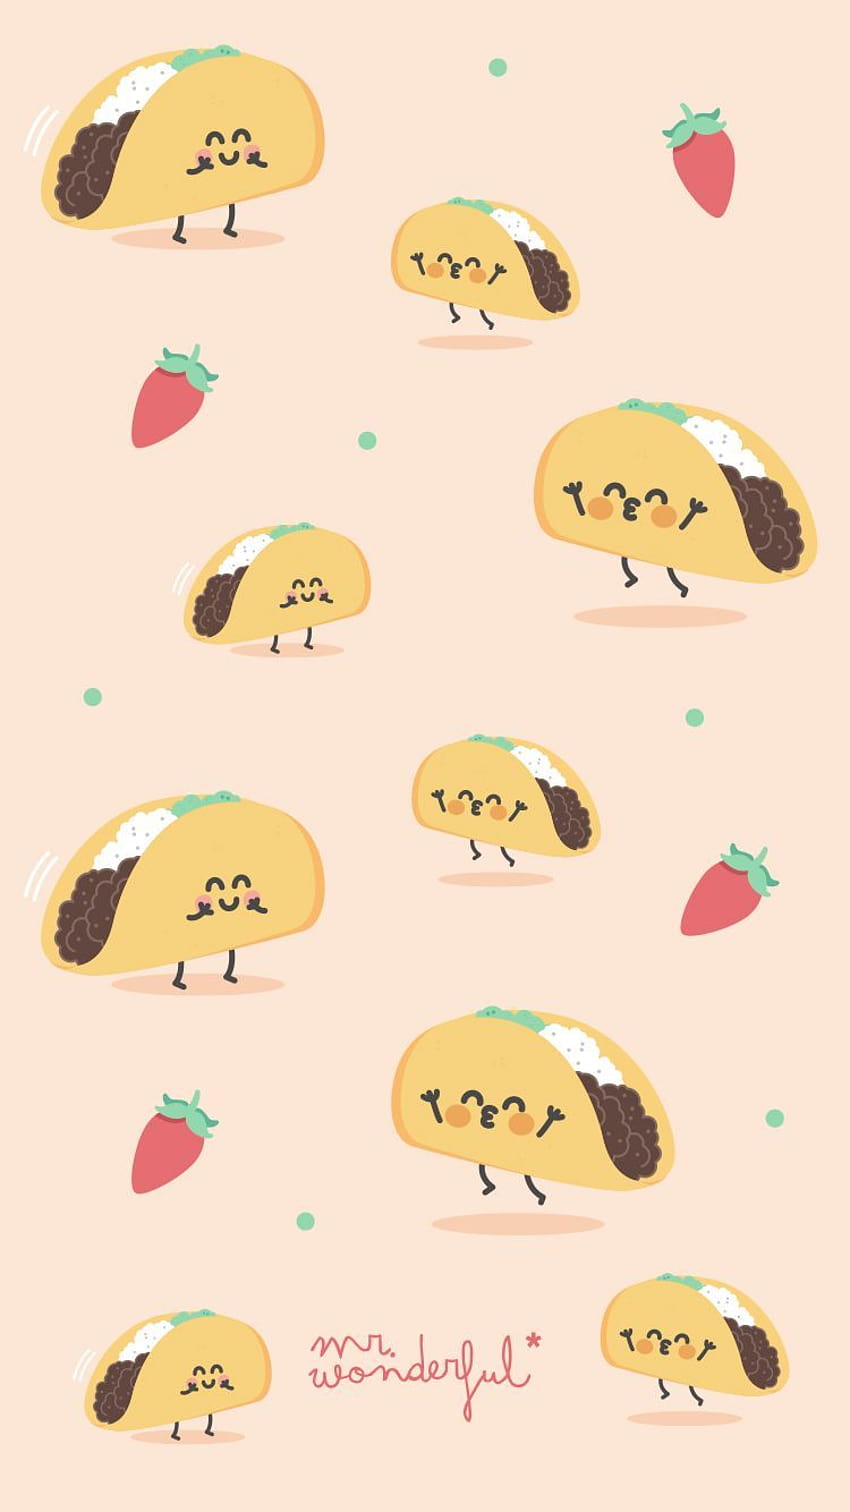 Taco Bell Wallpapers That Give Your Phone a Facelift